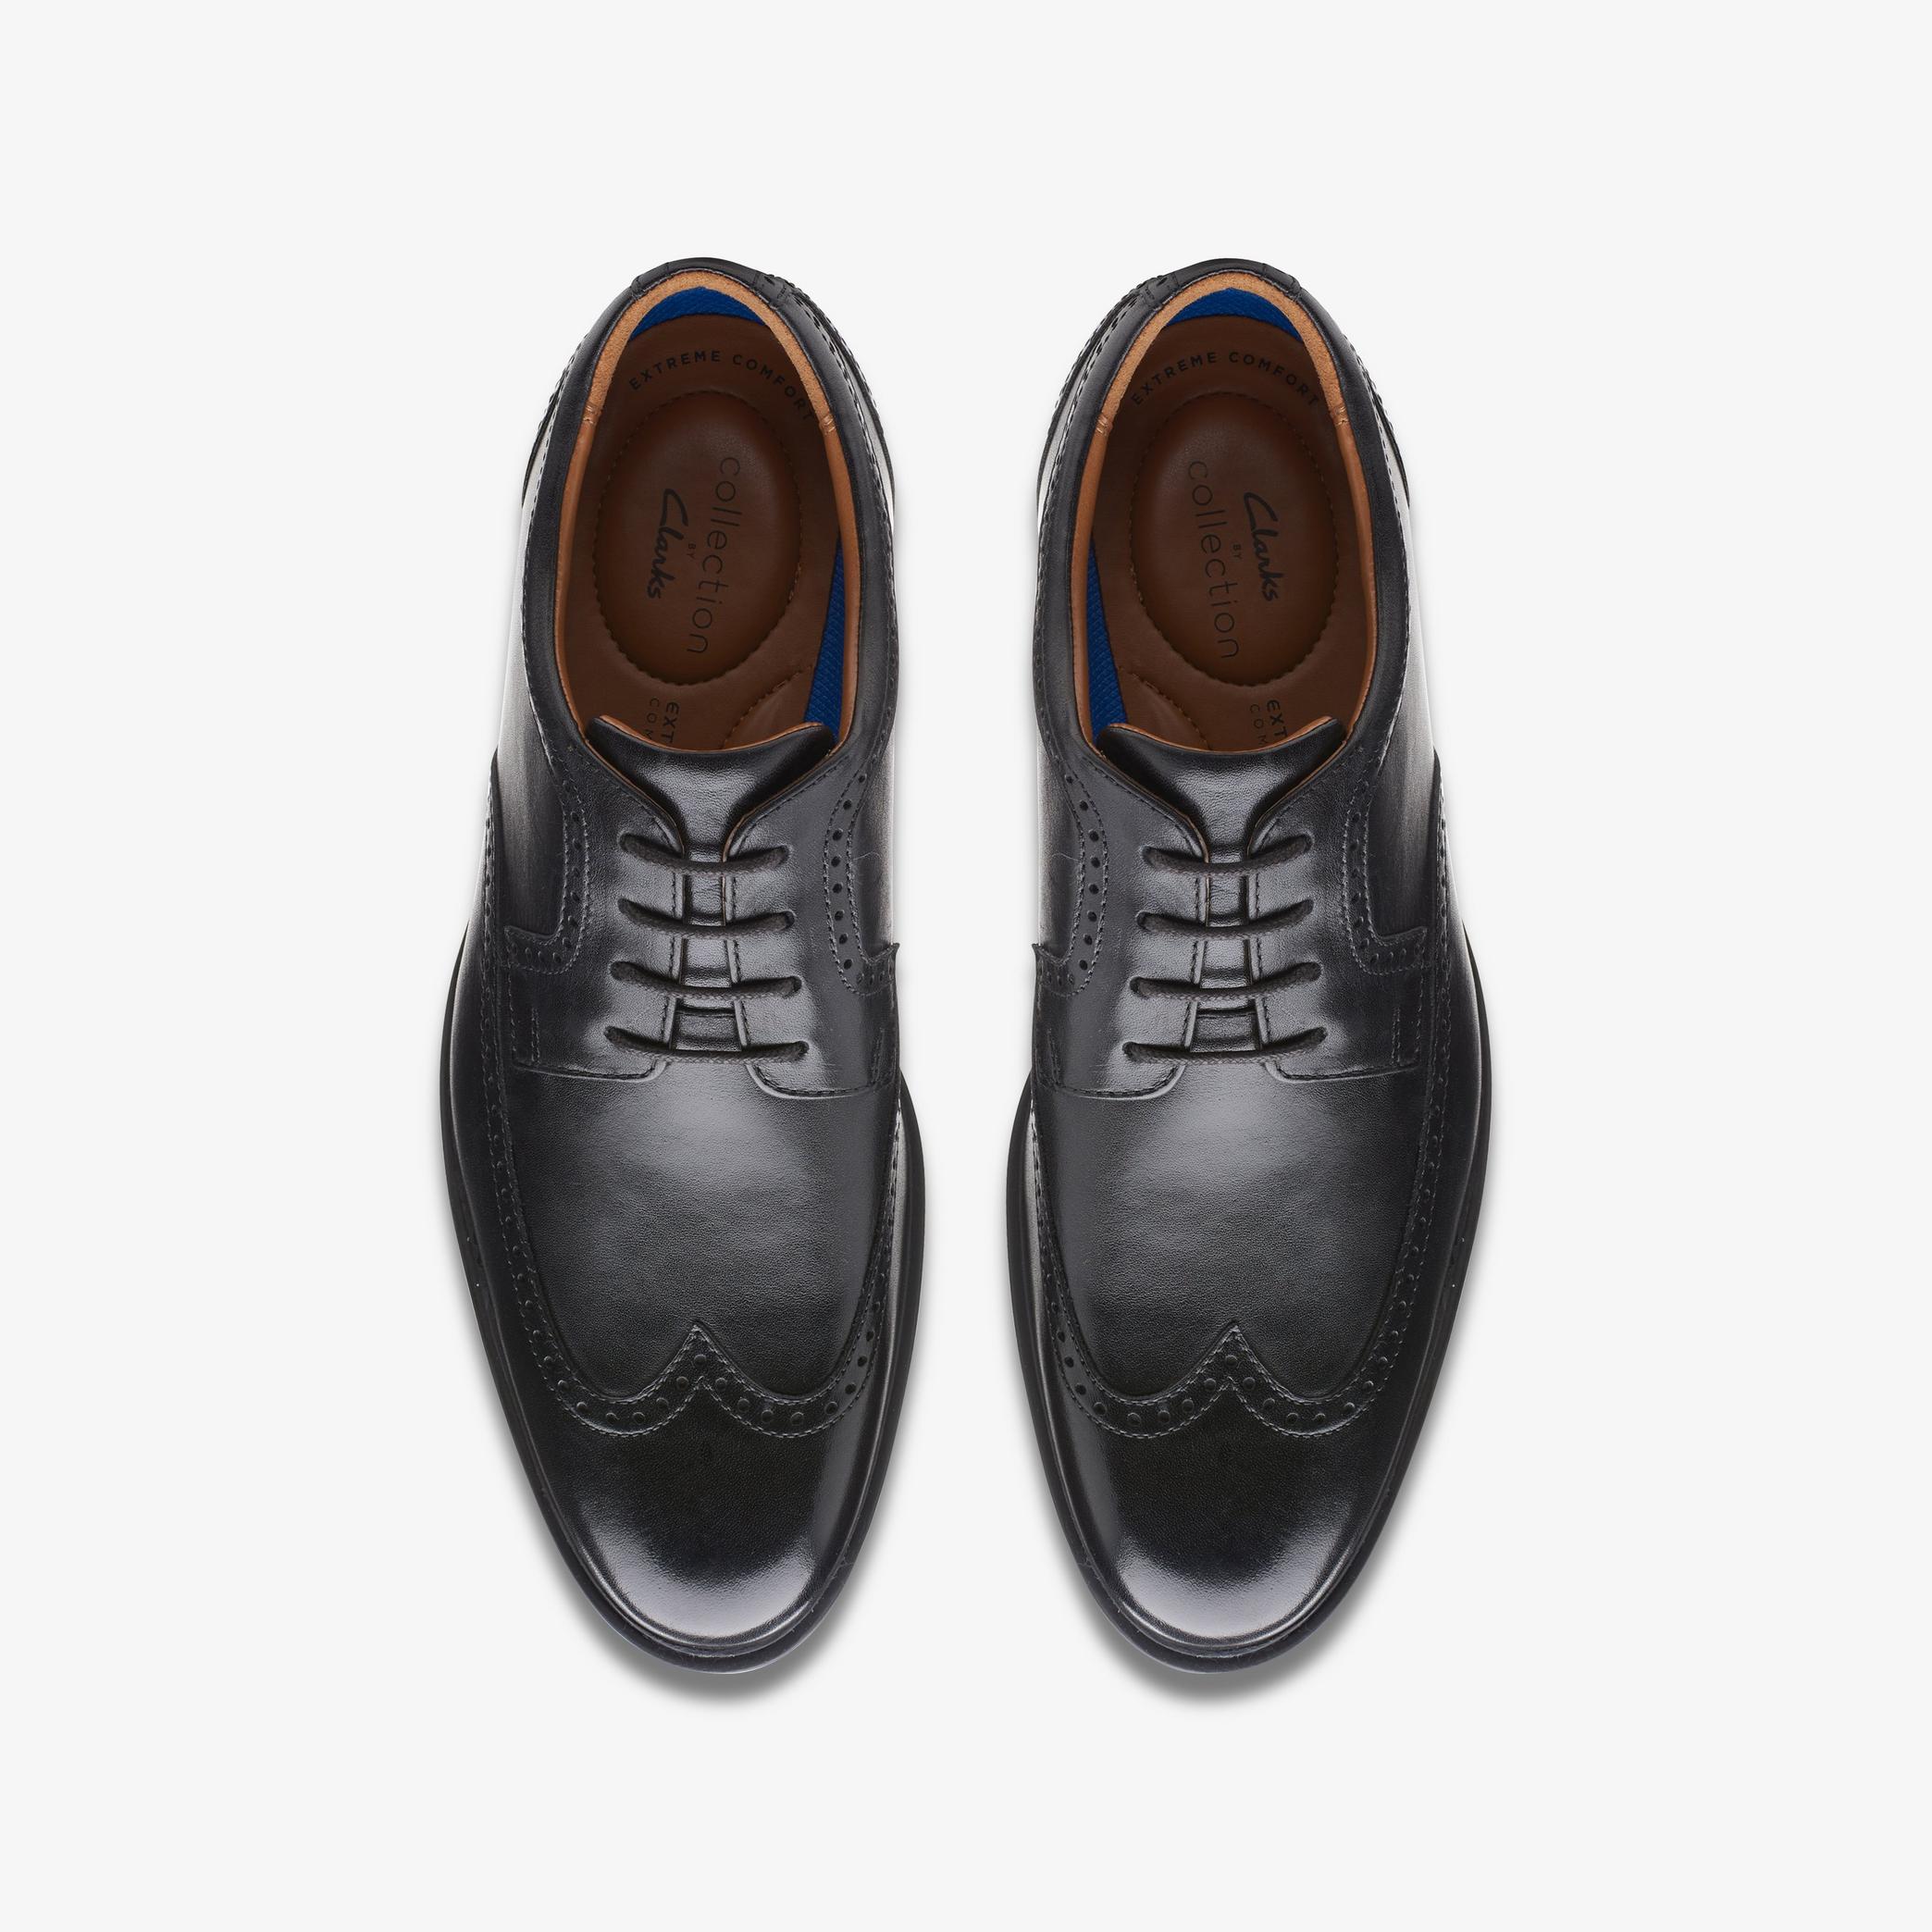 Whiddon Wing Black Leather Shoes, view 6 of 6